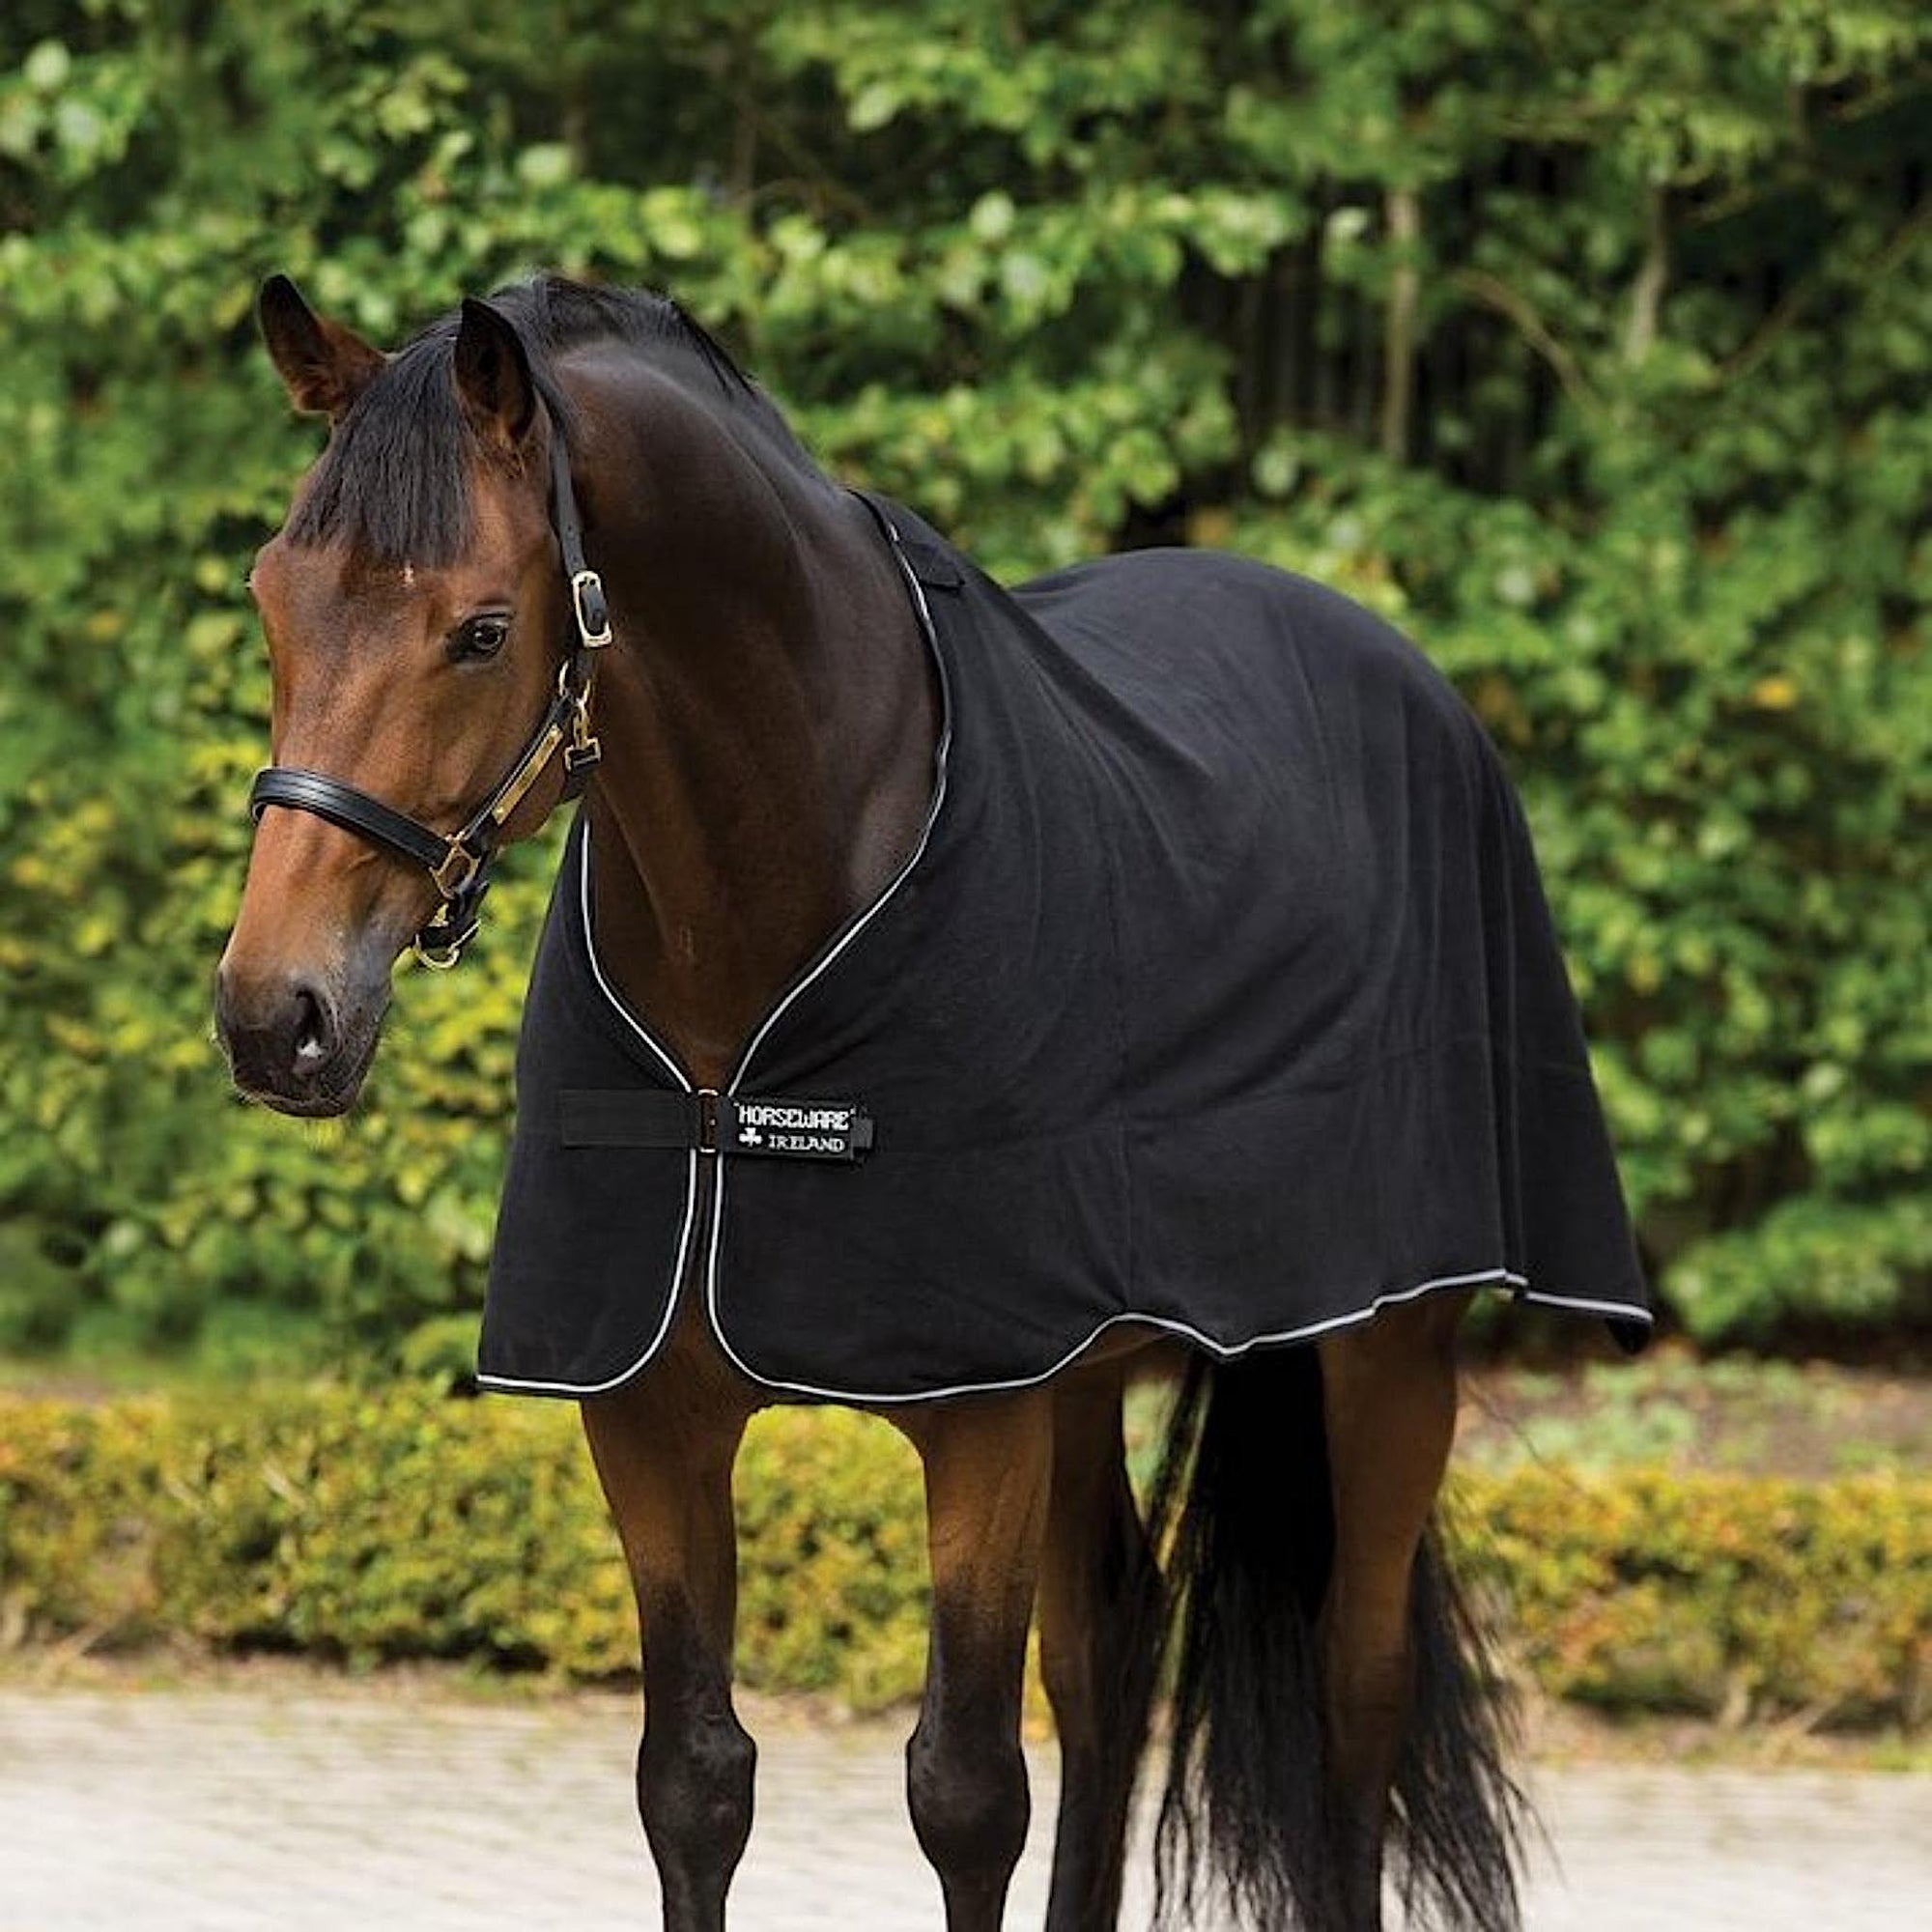 Bay horse wearing black fleece liner with white trim and details.